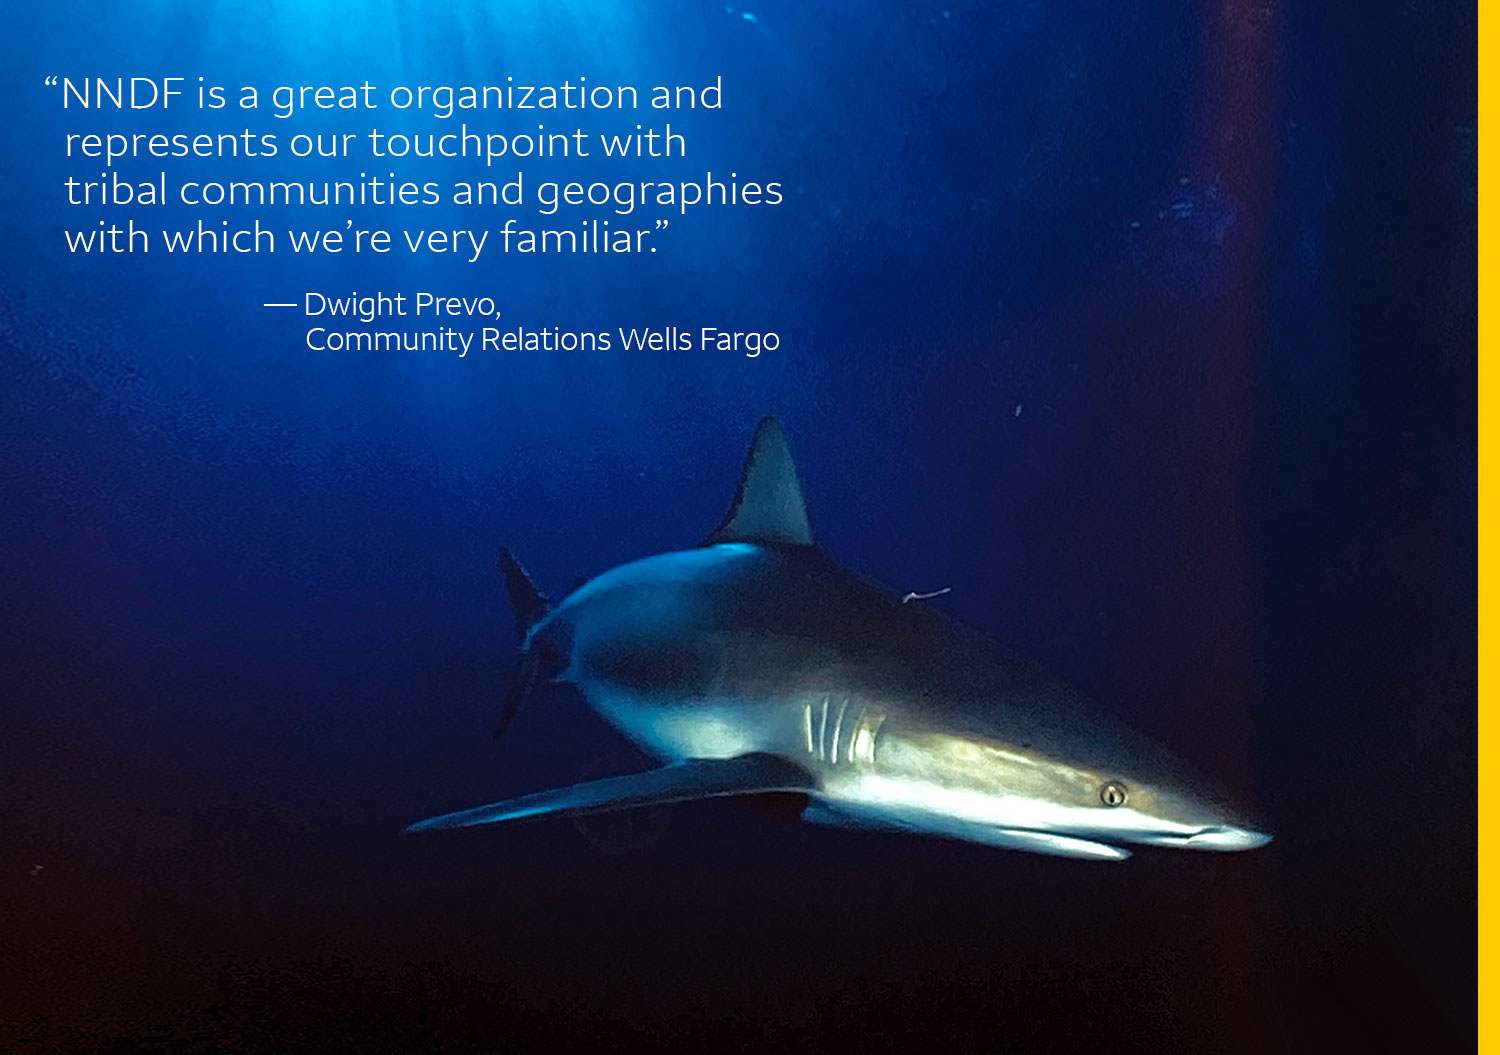  A photo of a shark underwater has the following quote: “NNDF is a great organization and represents our touchpoint with tribal communities and geographies with which we’re very familiar.” — Dwight Prevo, Community Relations Wells Fargo